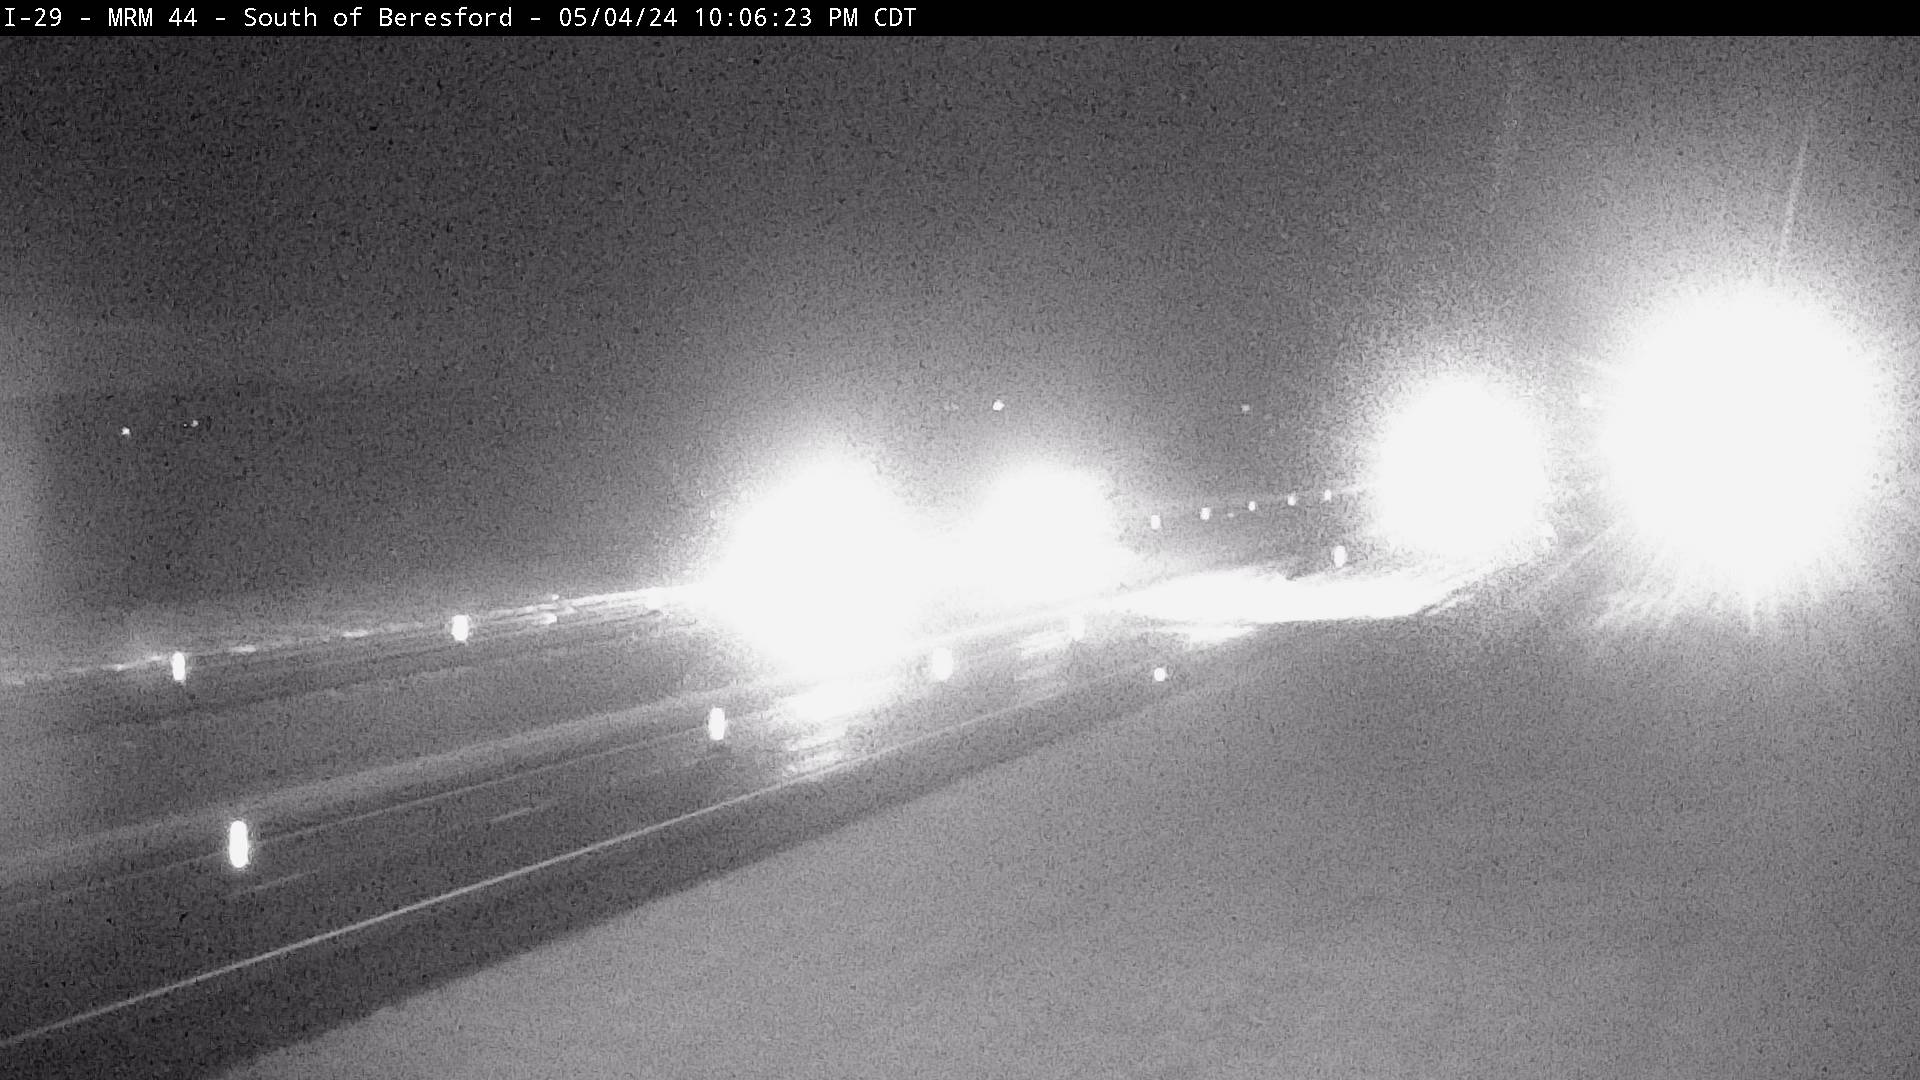 2 miles south of town along I-29 @ MP 44 - South Traffic Camera